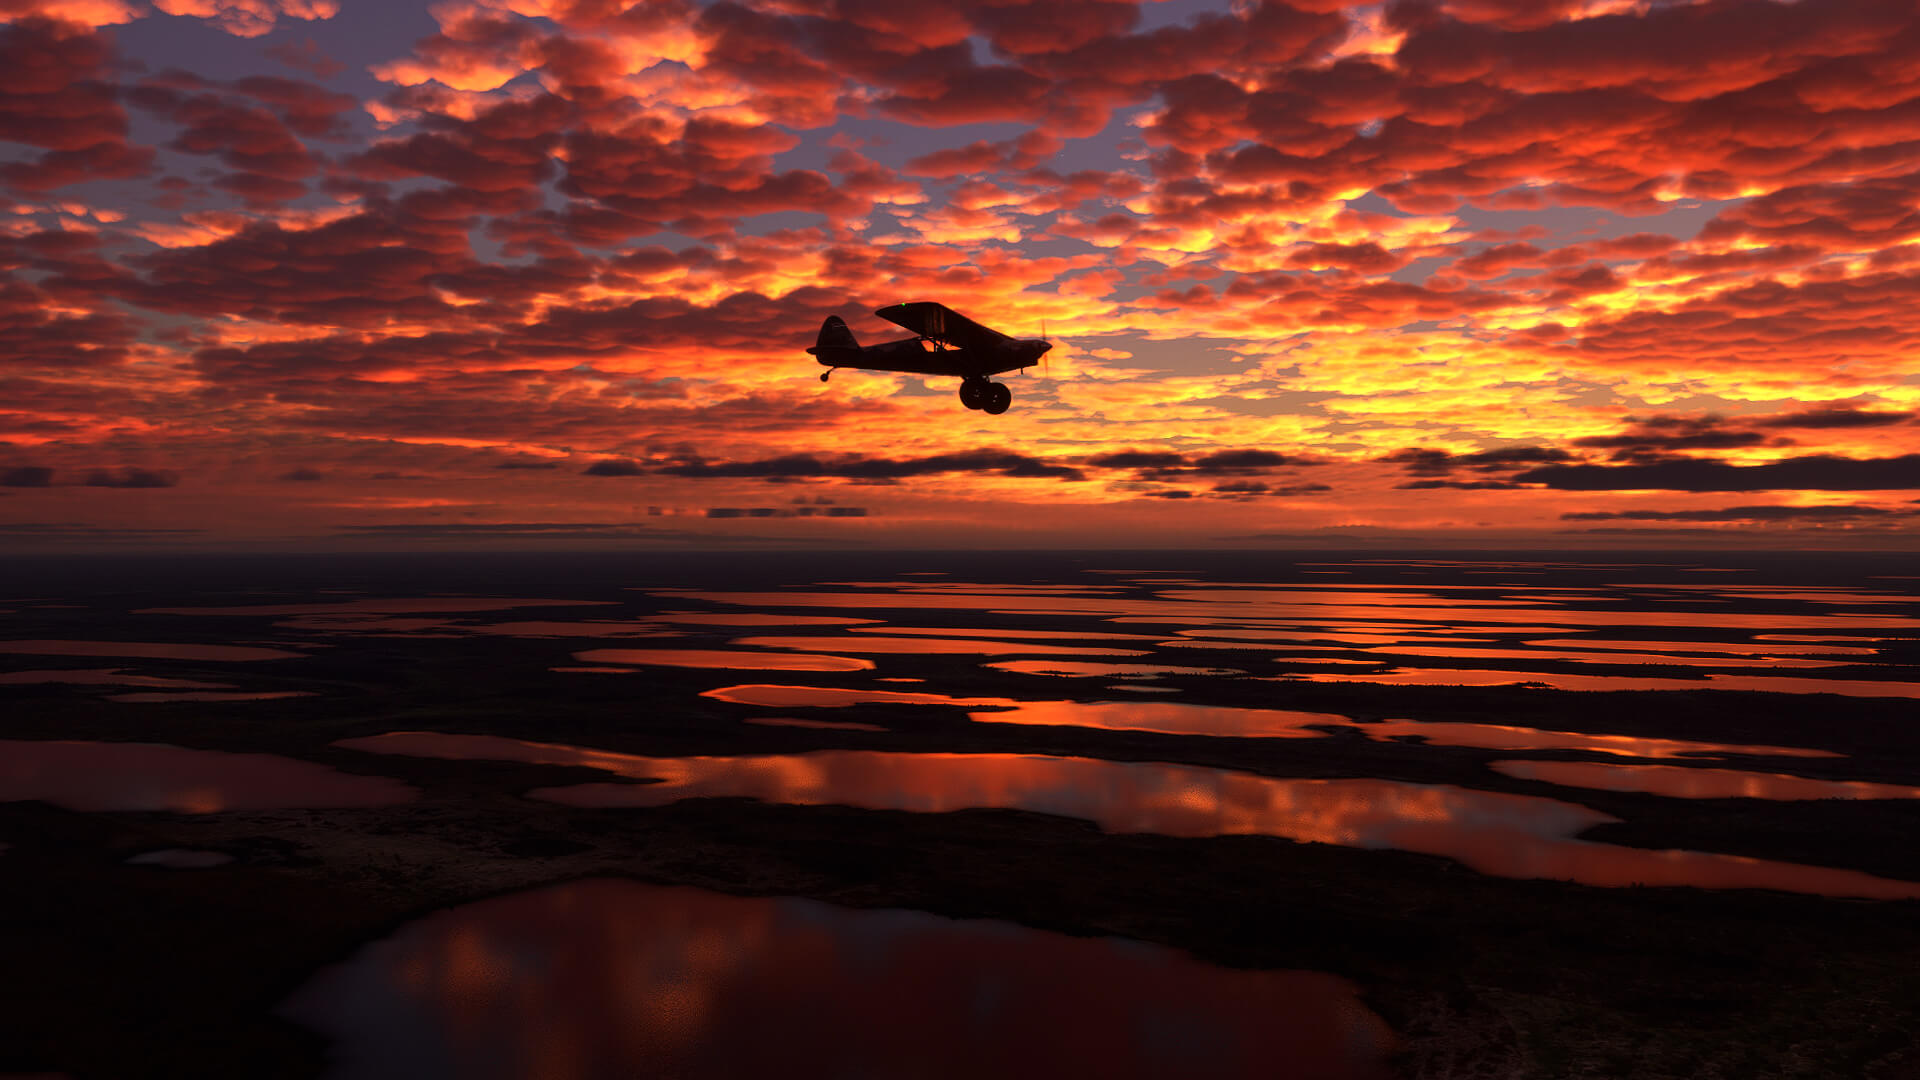 A fiery red and yellow sunset reflects on several lakes, and casts a lone plane in silhouette.